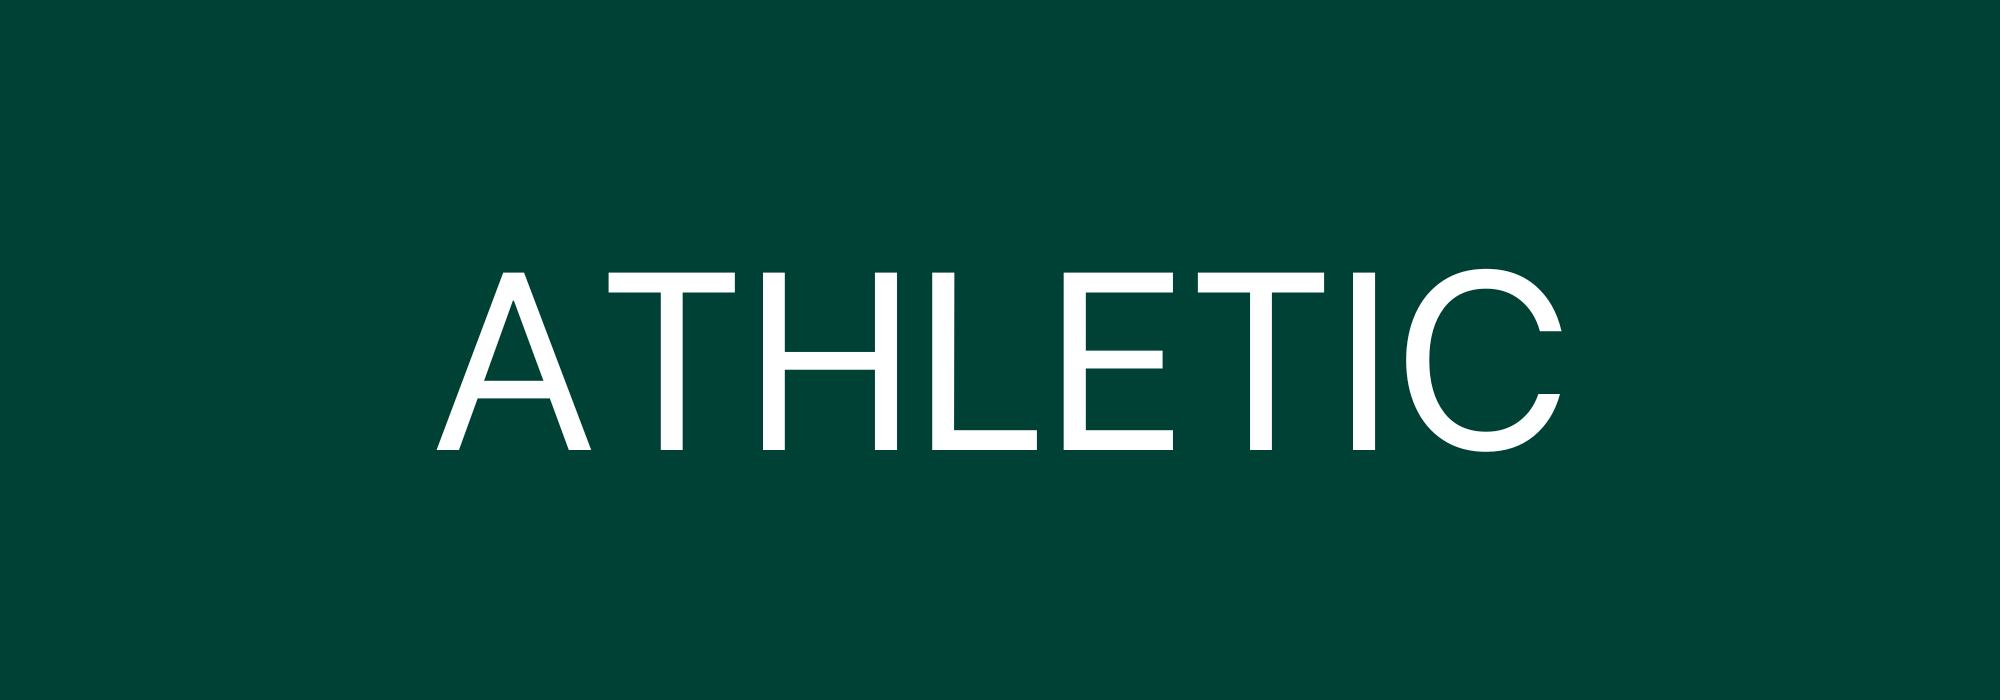 athletic scholarship web page